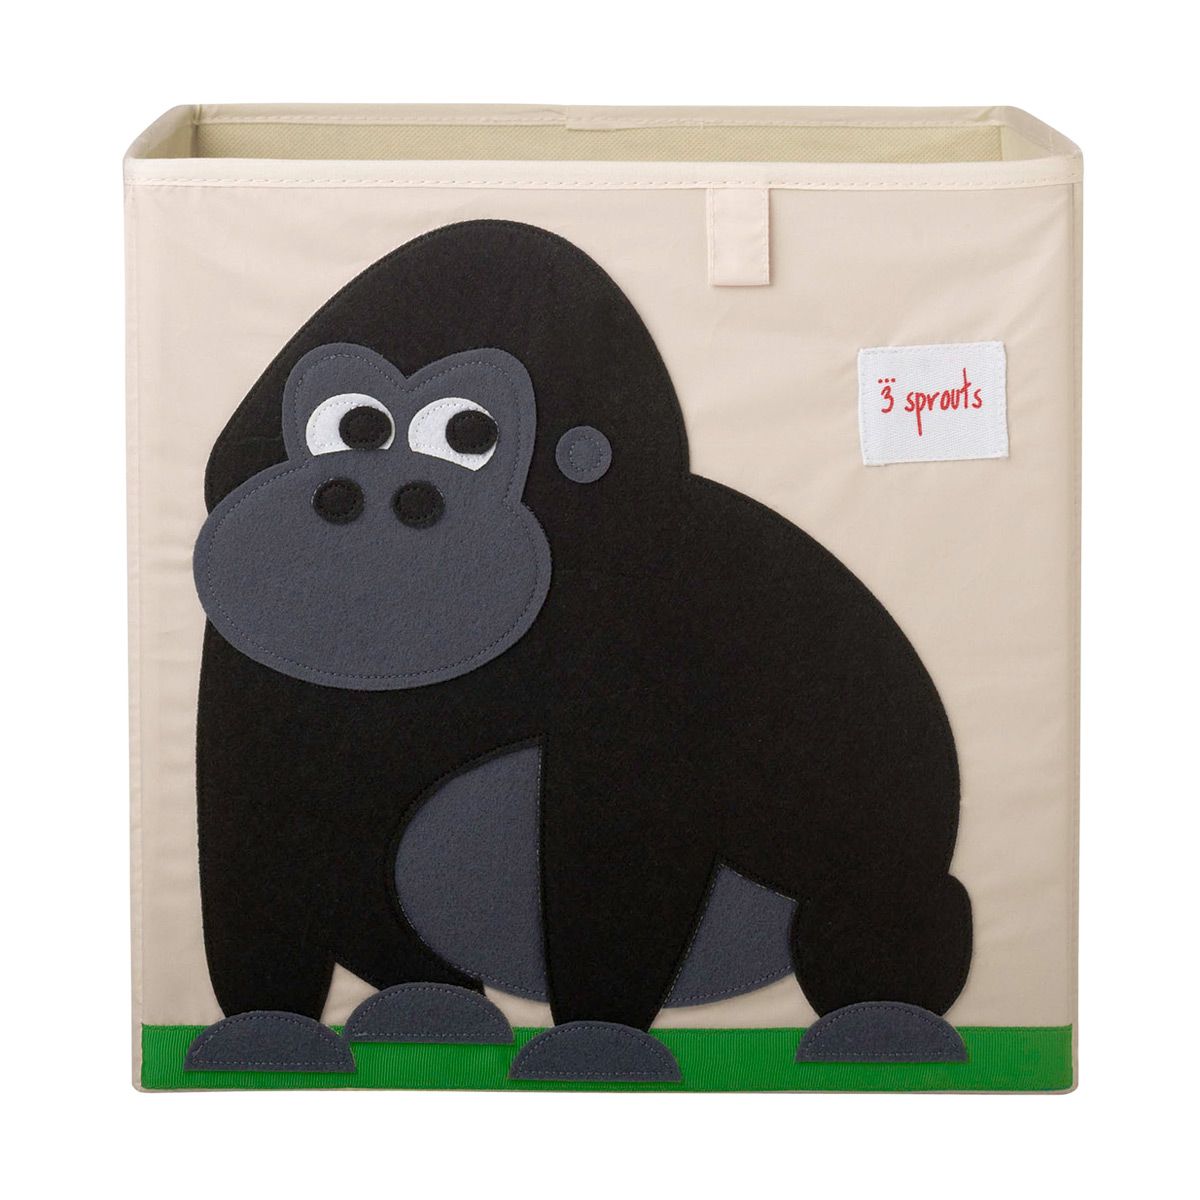 Gorilla Toy Storage Cube | The Container Store